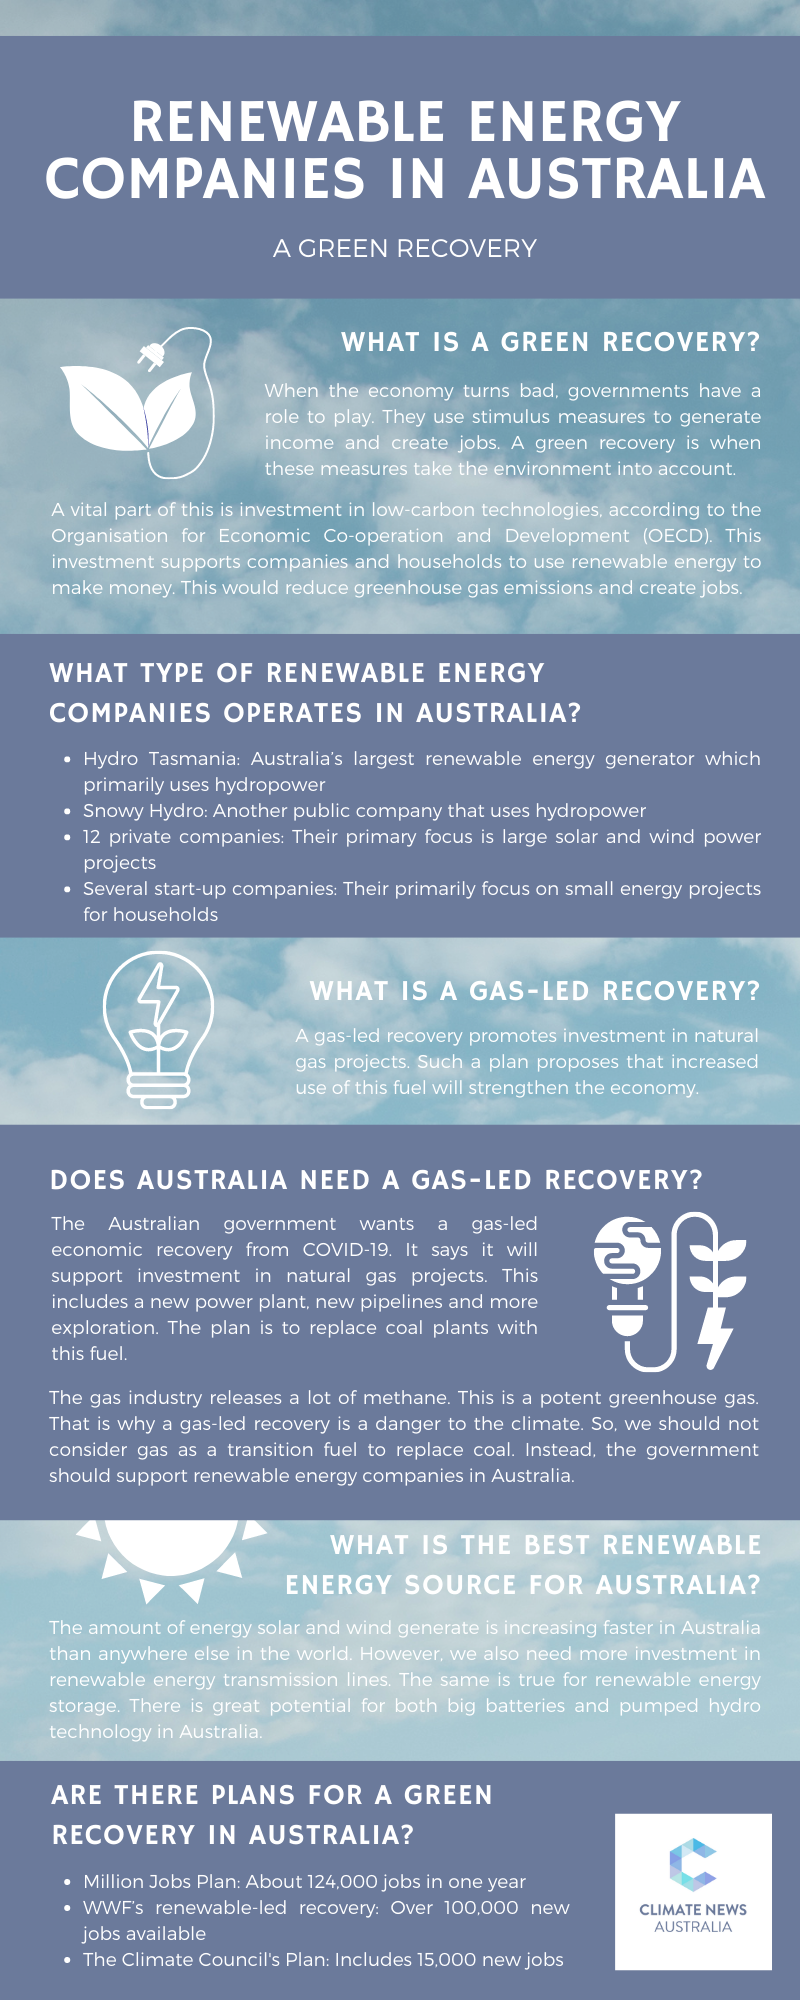 Renewable Energy Companies in Australia: A Green Recovery